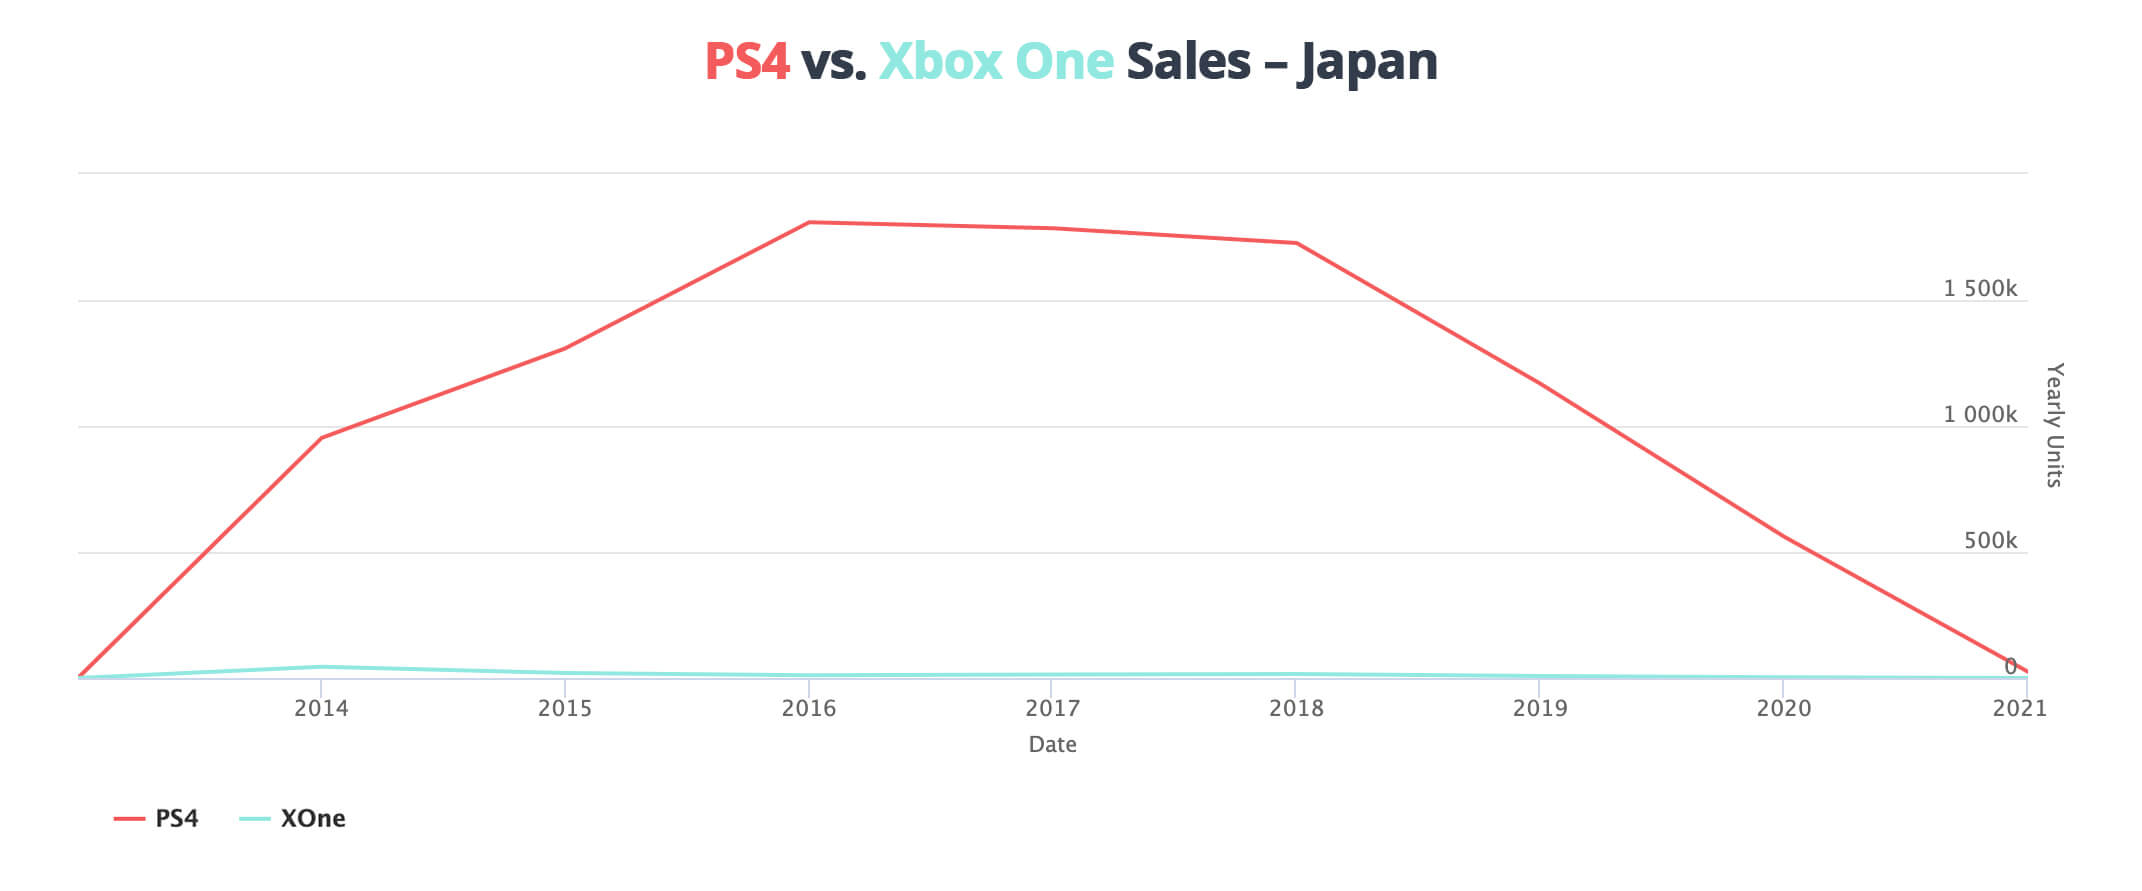 Japan-ps4-sales-compared-to-xbox-one-sales